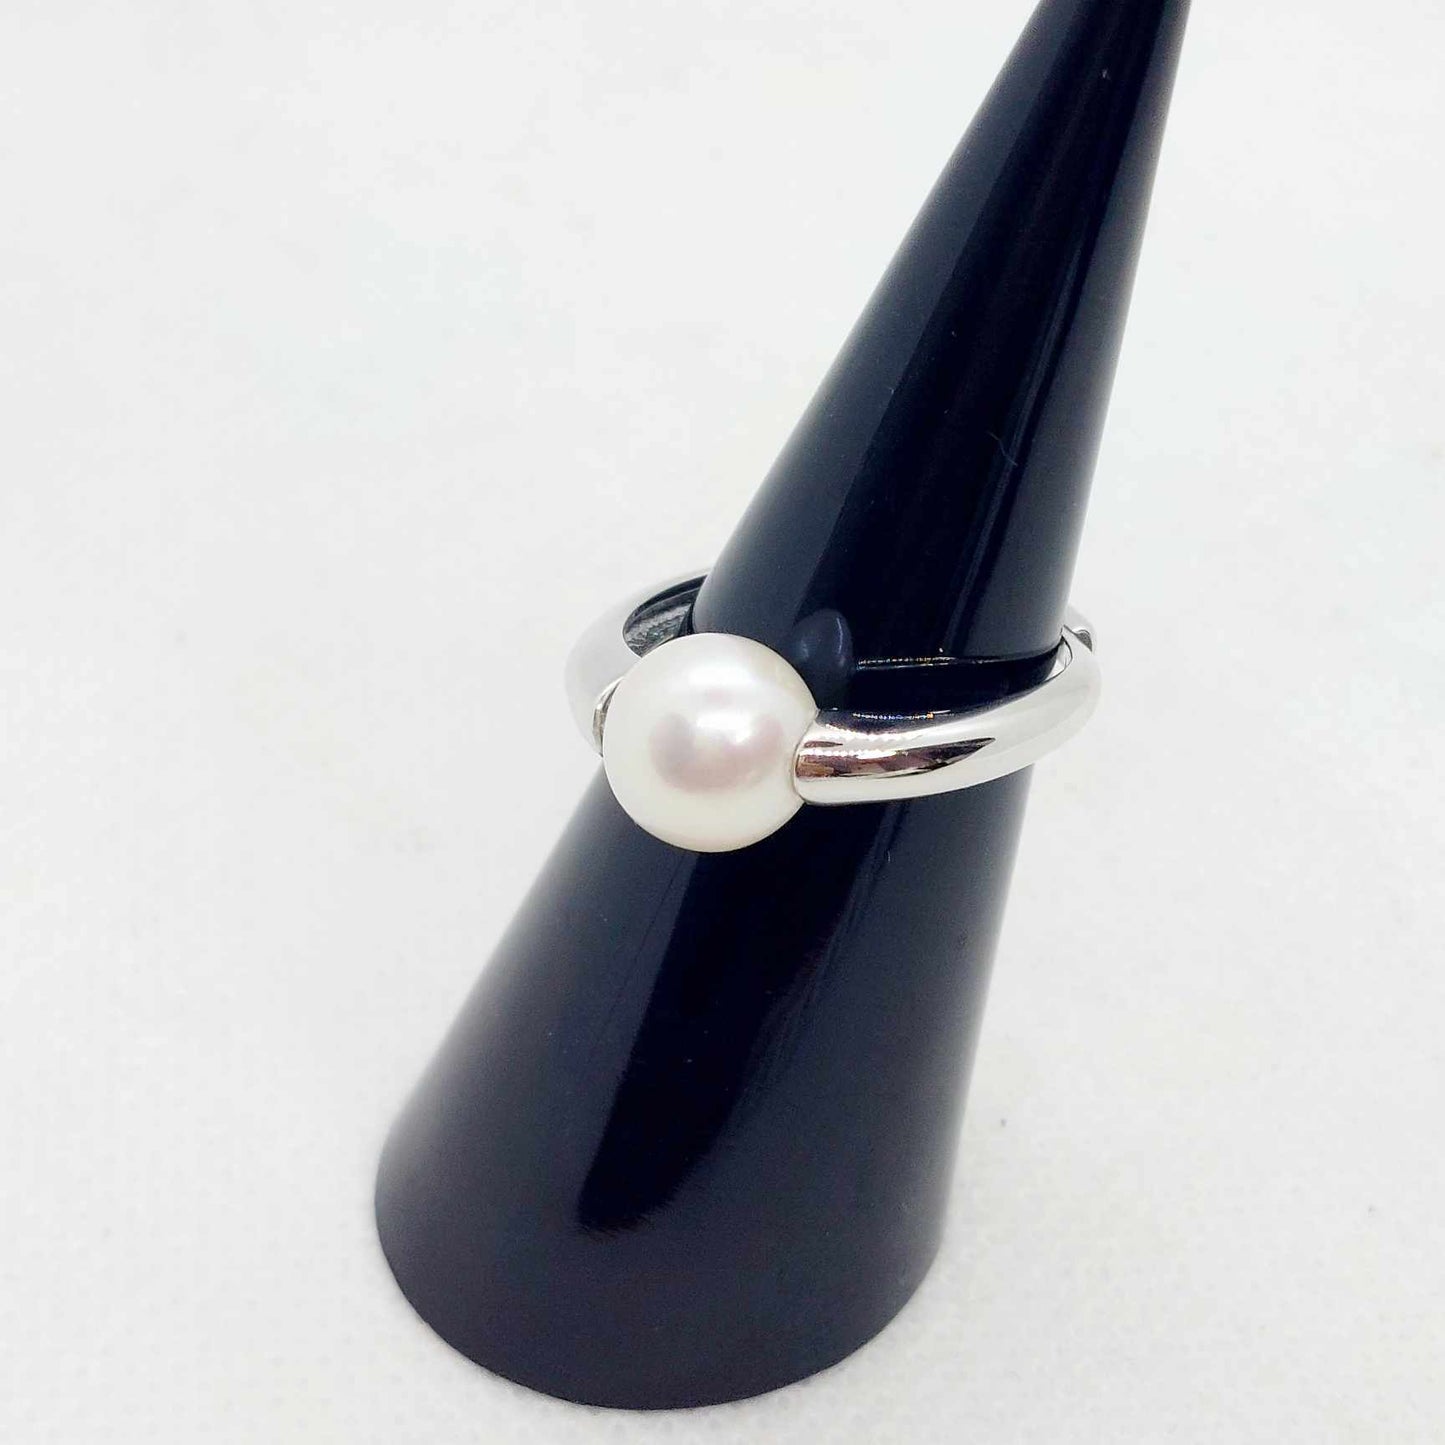 Natural Pearl Ring in Sterling Silver Resizeable